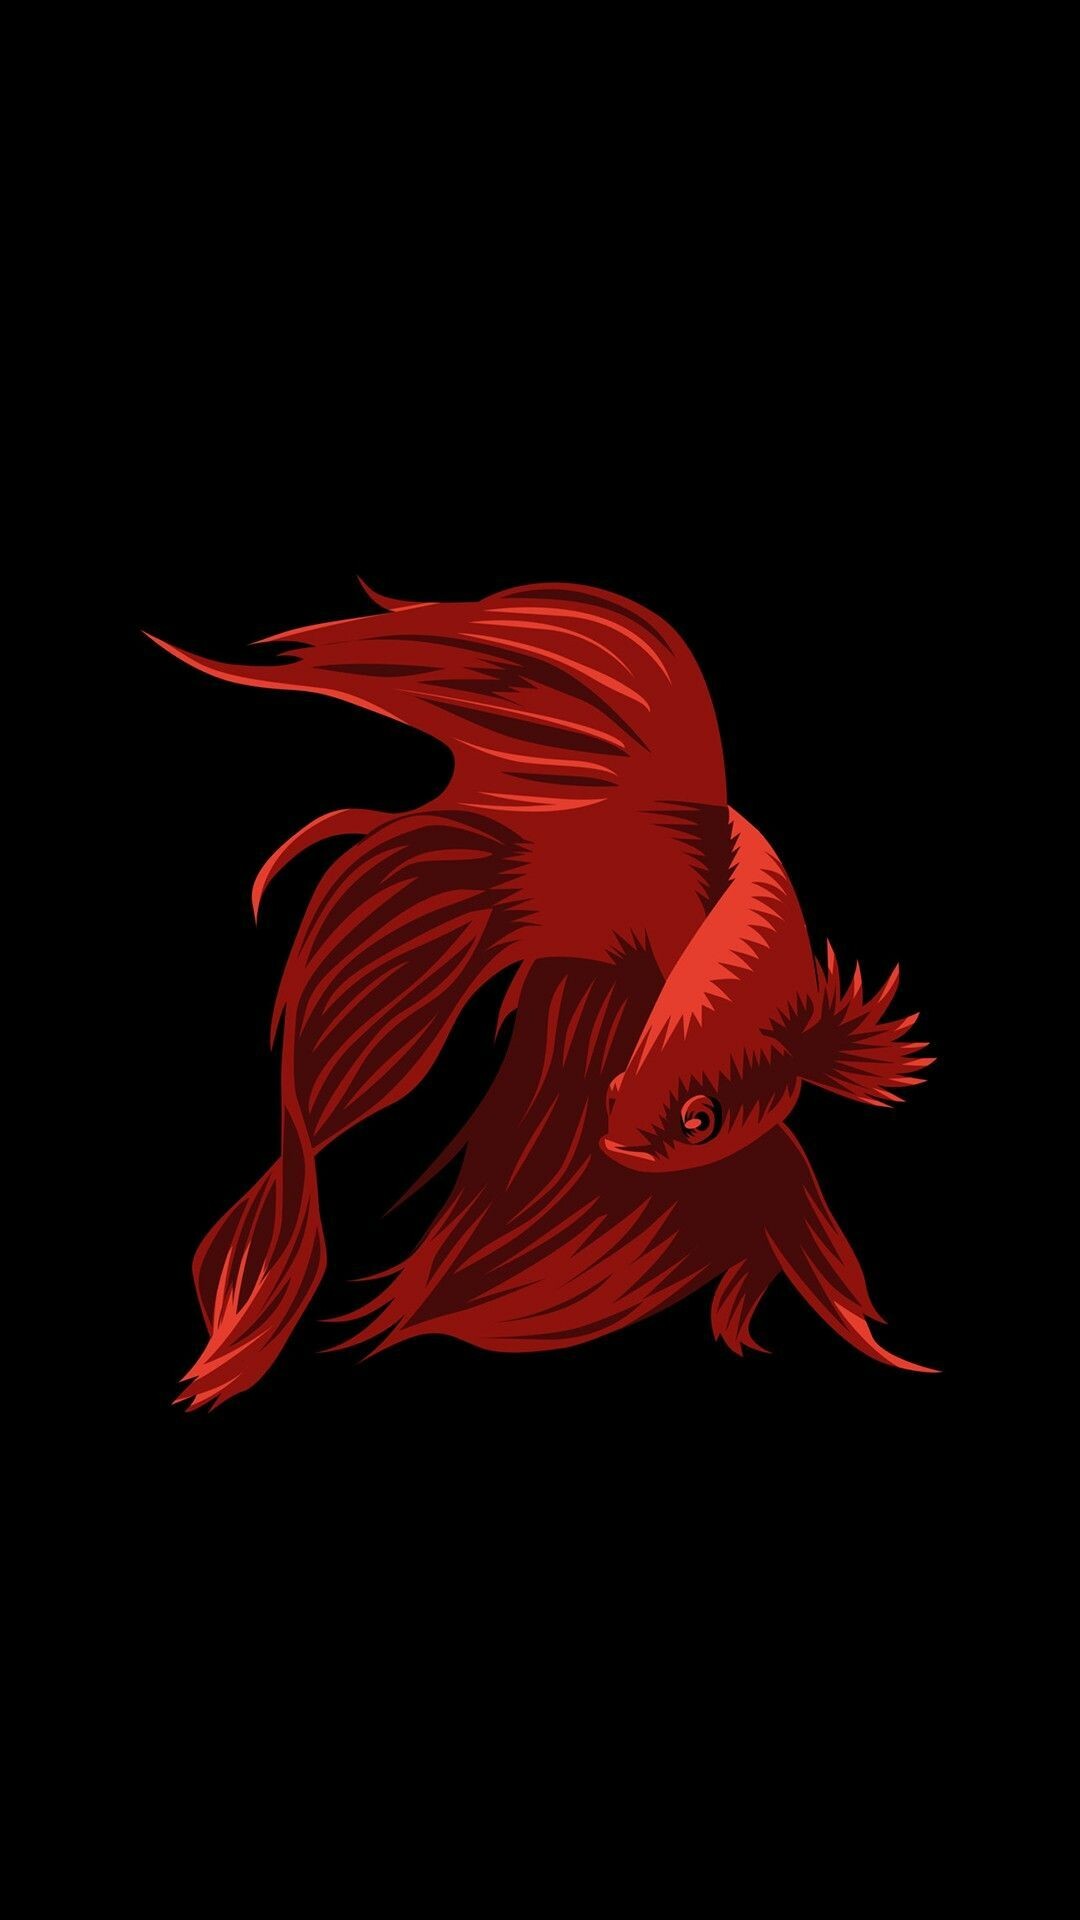 Fish: Aquatic cold-blooded vertebrates found both at sea and in freshwater. 1080x1920 Full HD Background.